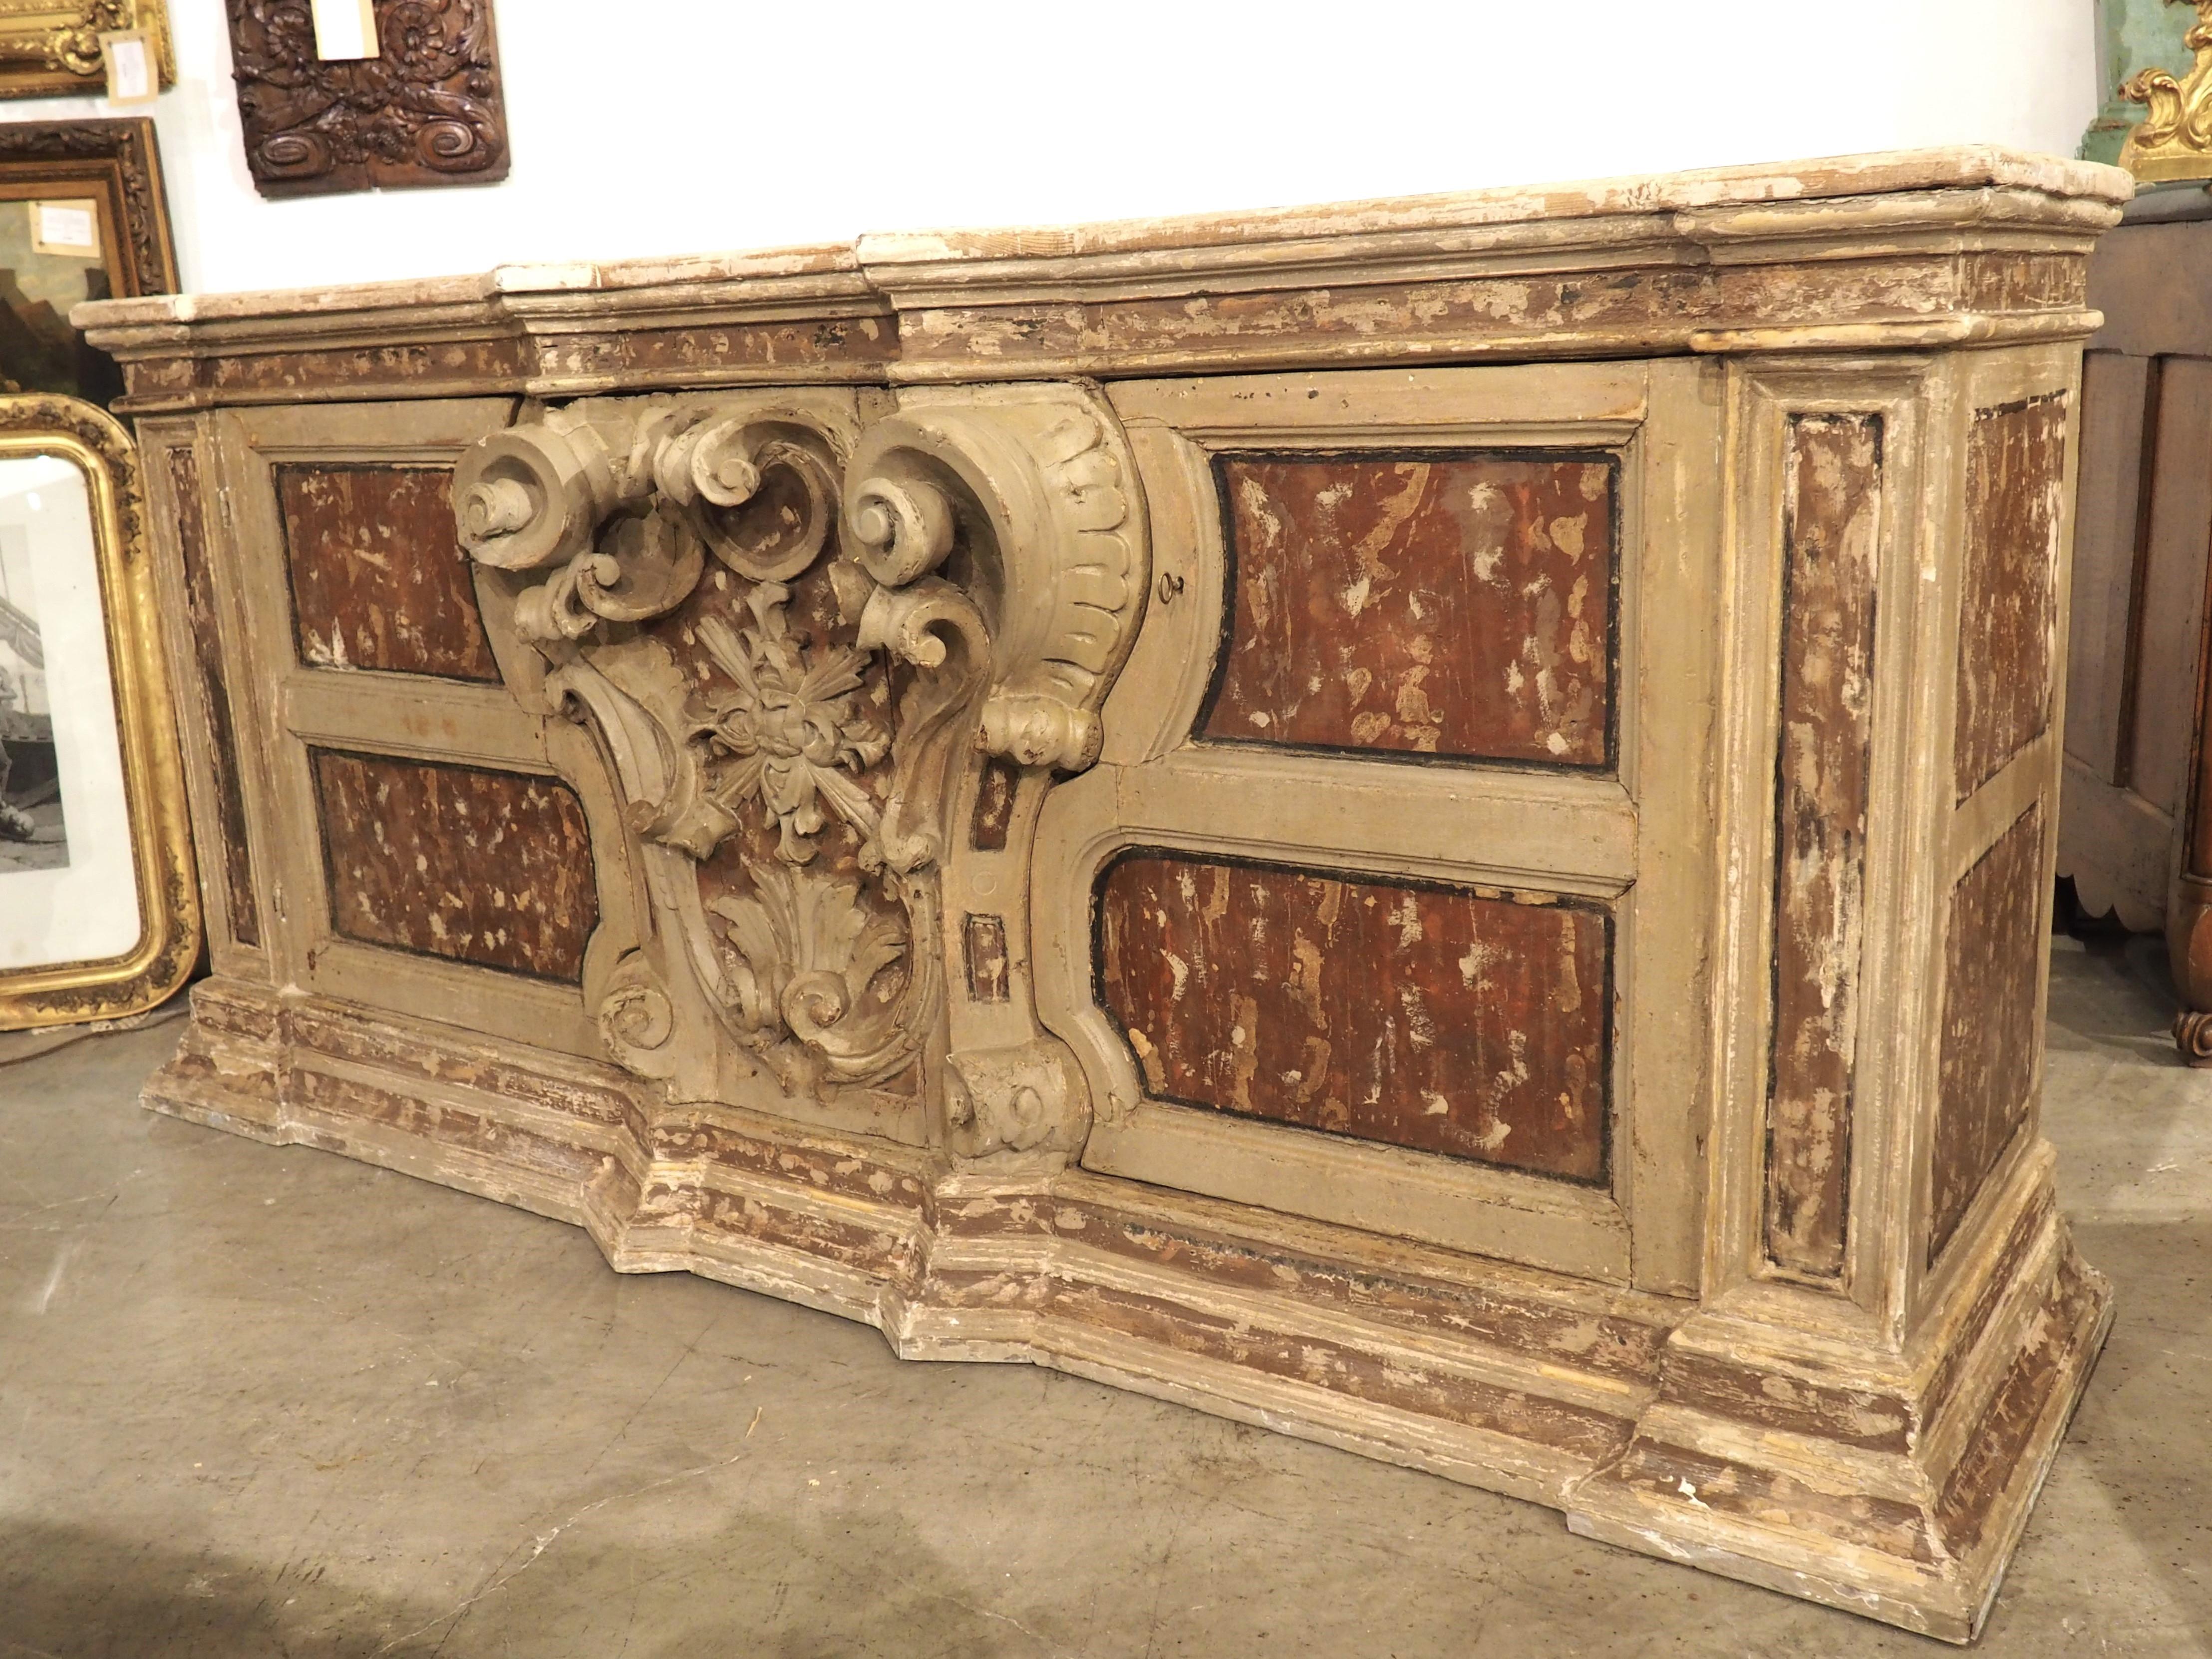 Dating to the 1700s, the central cartouche of this credenza buffet was originally from an altar, in Naples, Italy. The cartouche is a fantastic relief carving of a highly scrolled console with a foliate medallion encompassed by volutes, scrolls, and